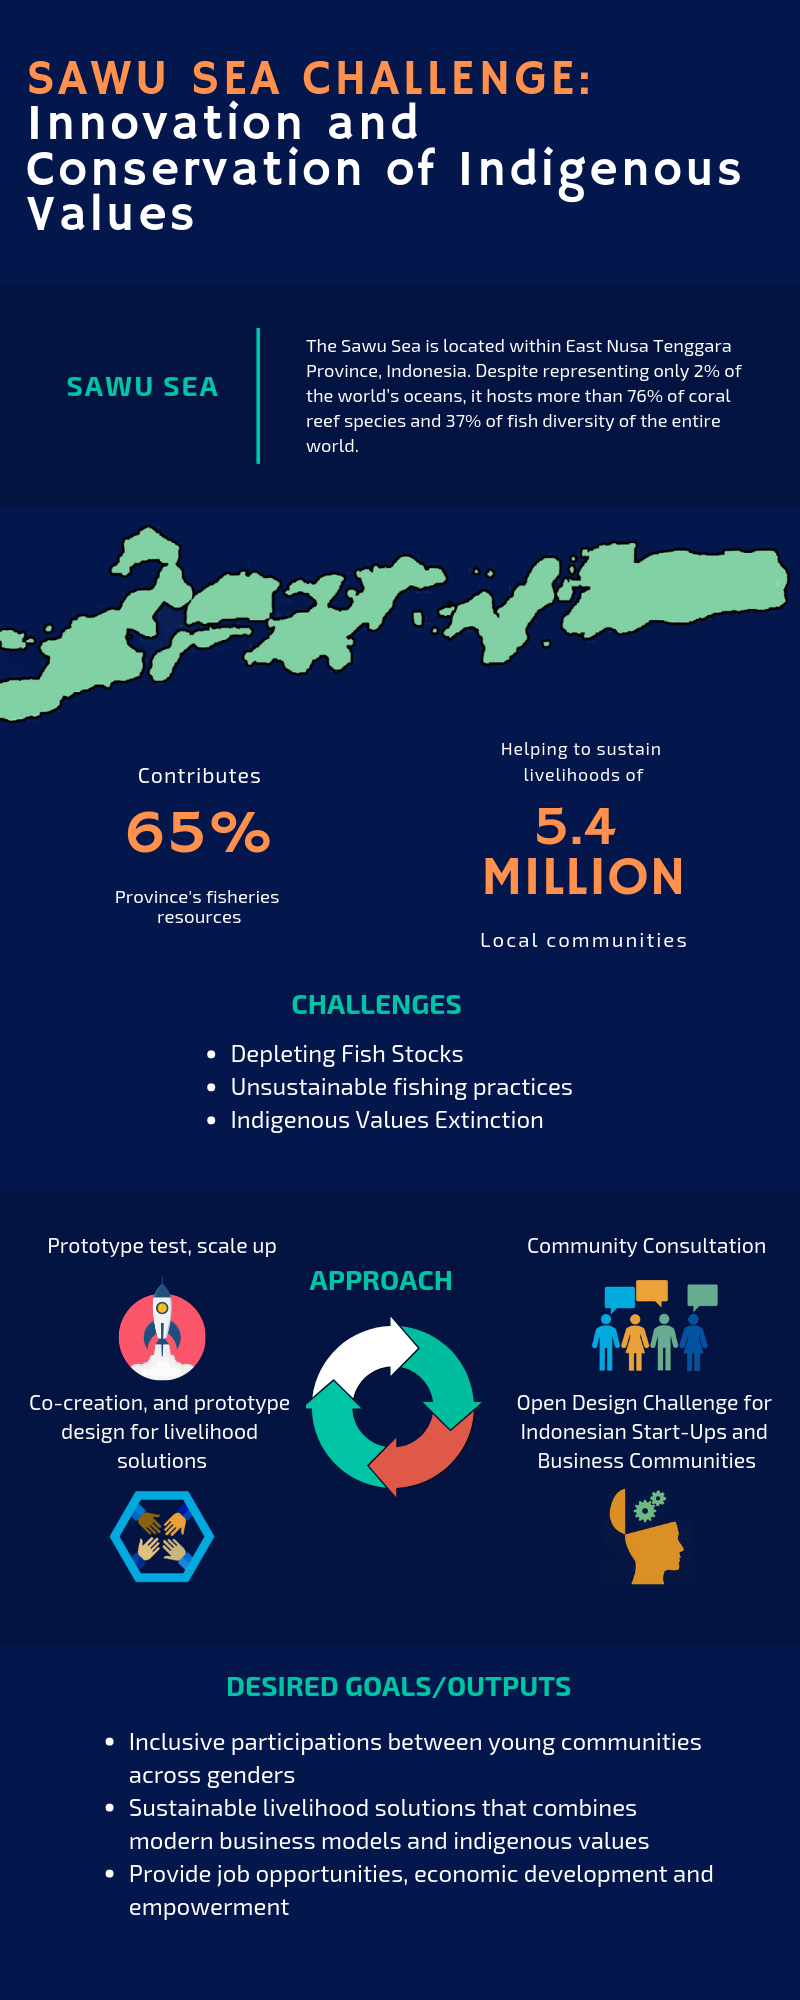 Sawu Sea Challenge: Innovation and Conservation of Indigenous Values